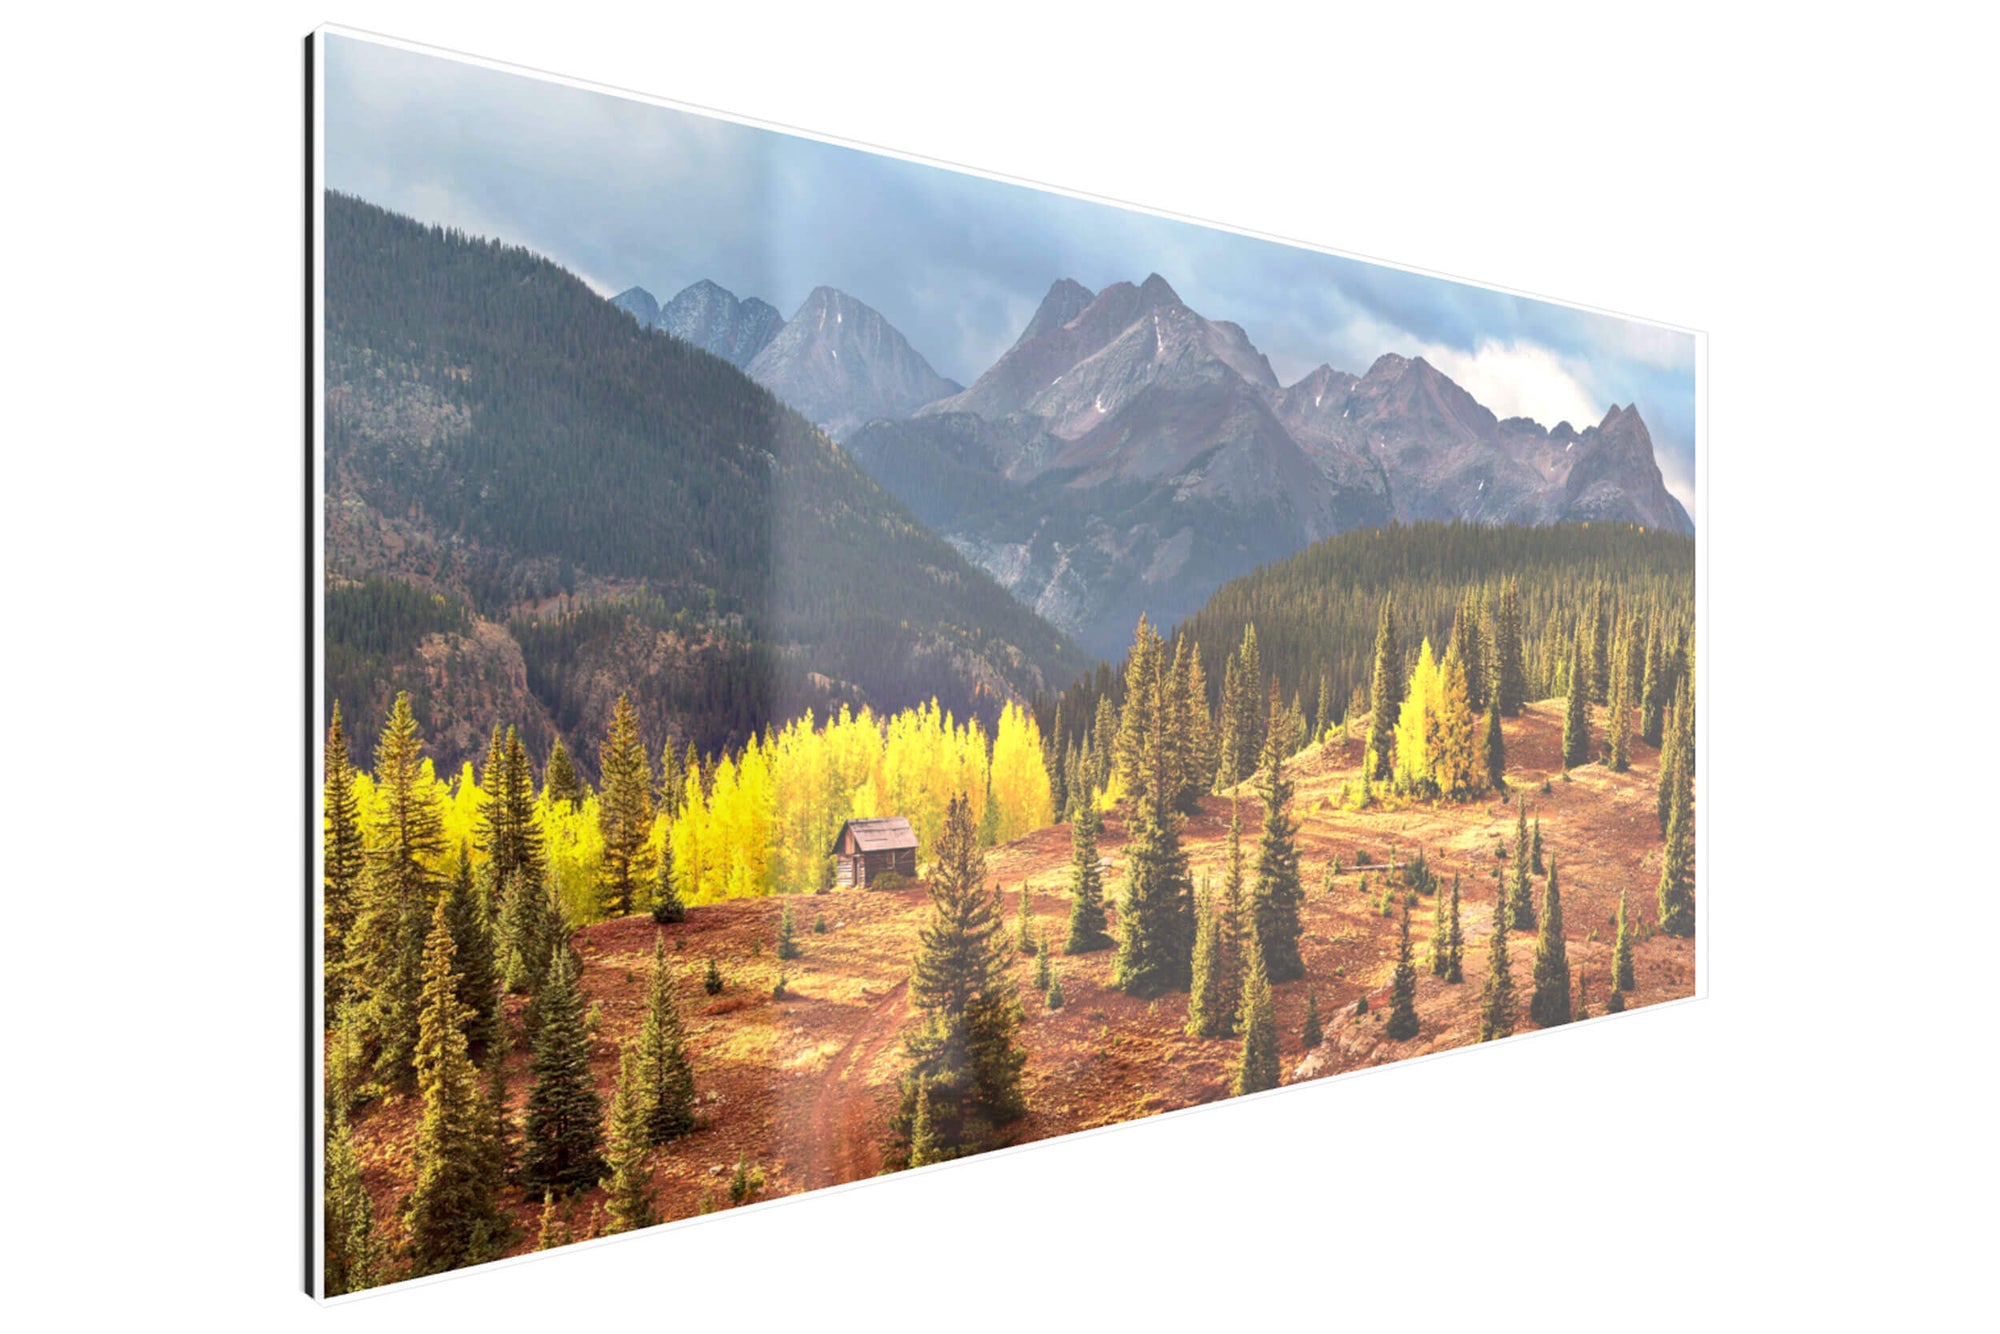 A TruLife acrylic cabin picture from Molas Pass near Silverton during peak Colorado fall.